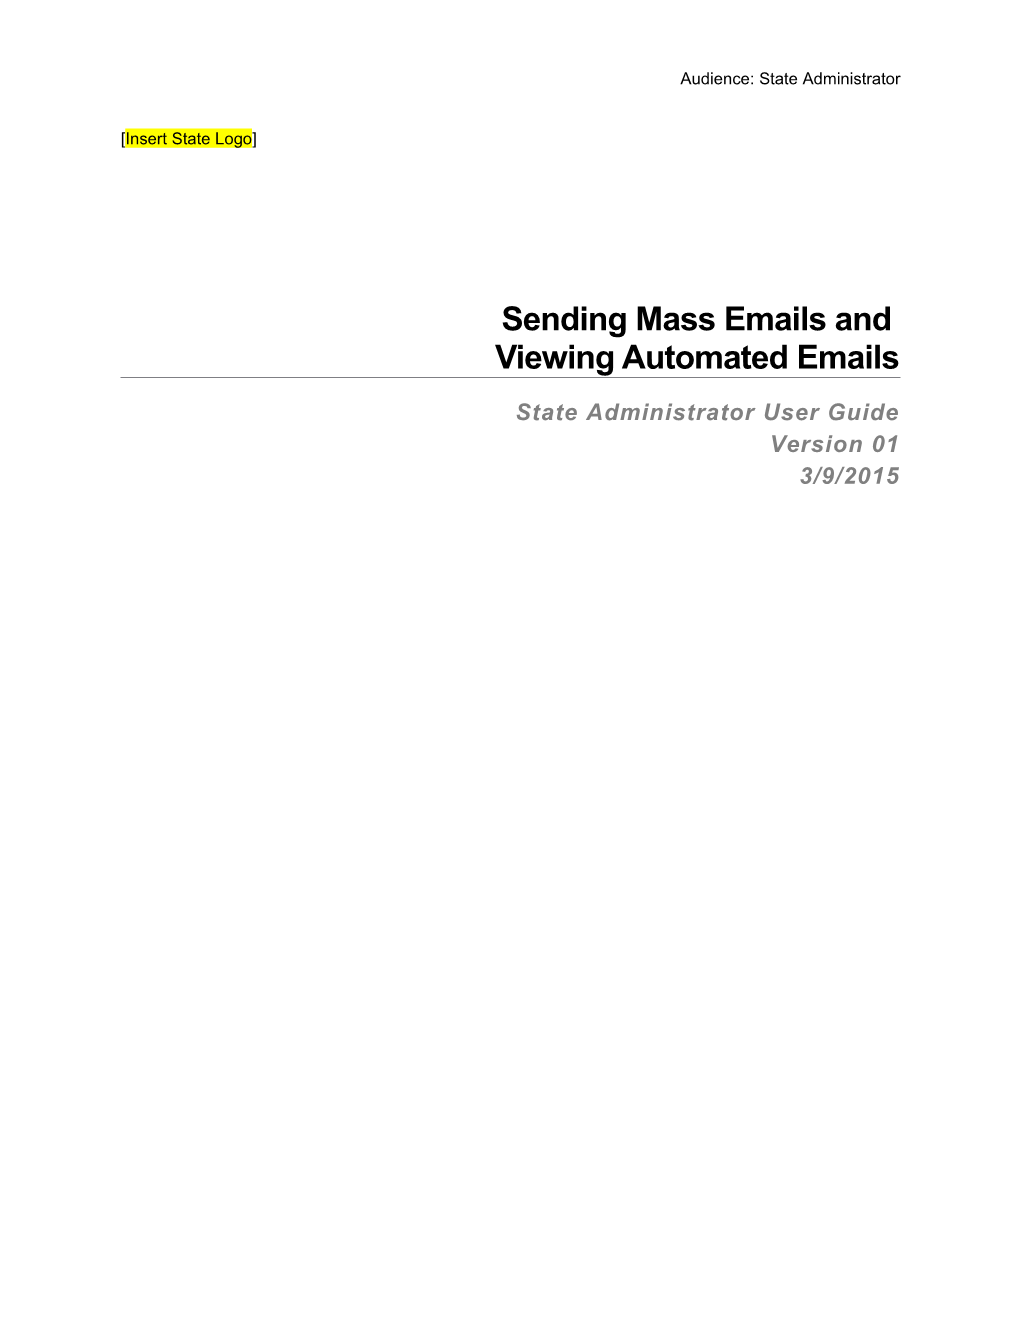 Sending Mass Emails and Viewing Automated Emails